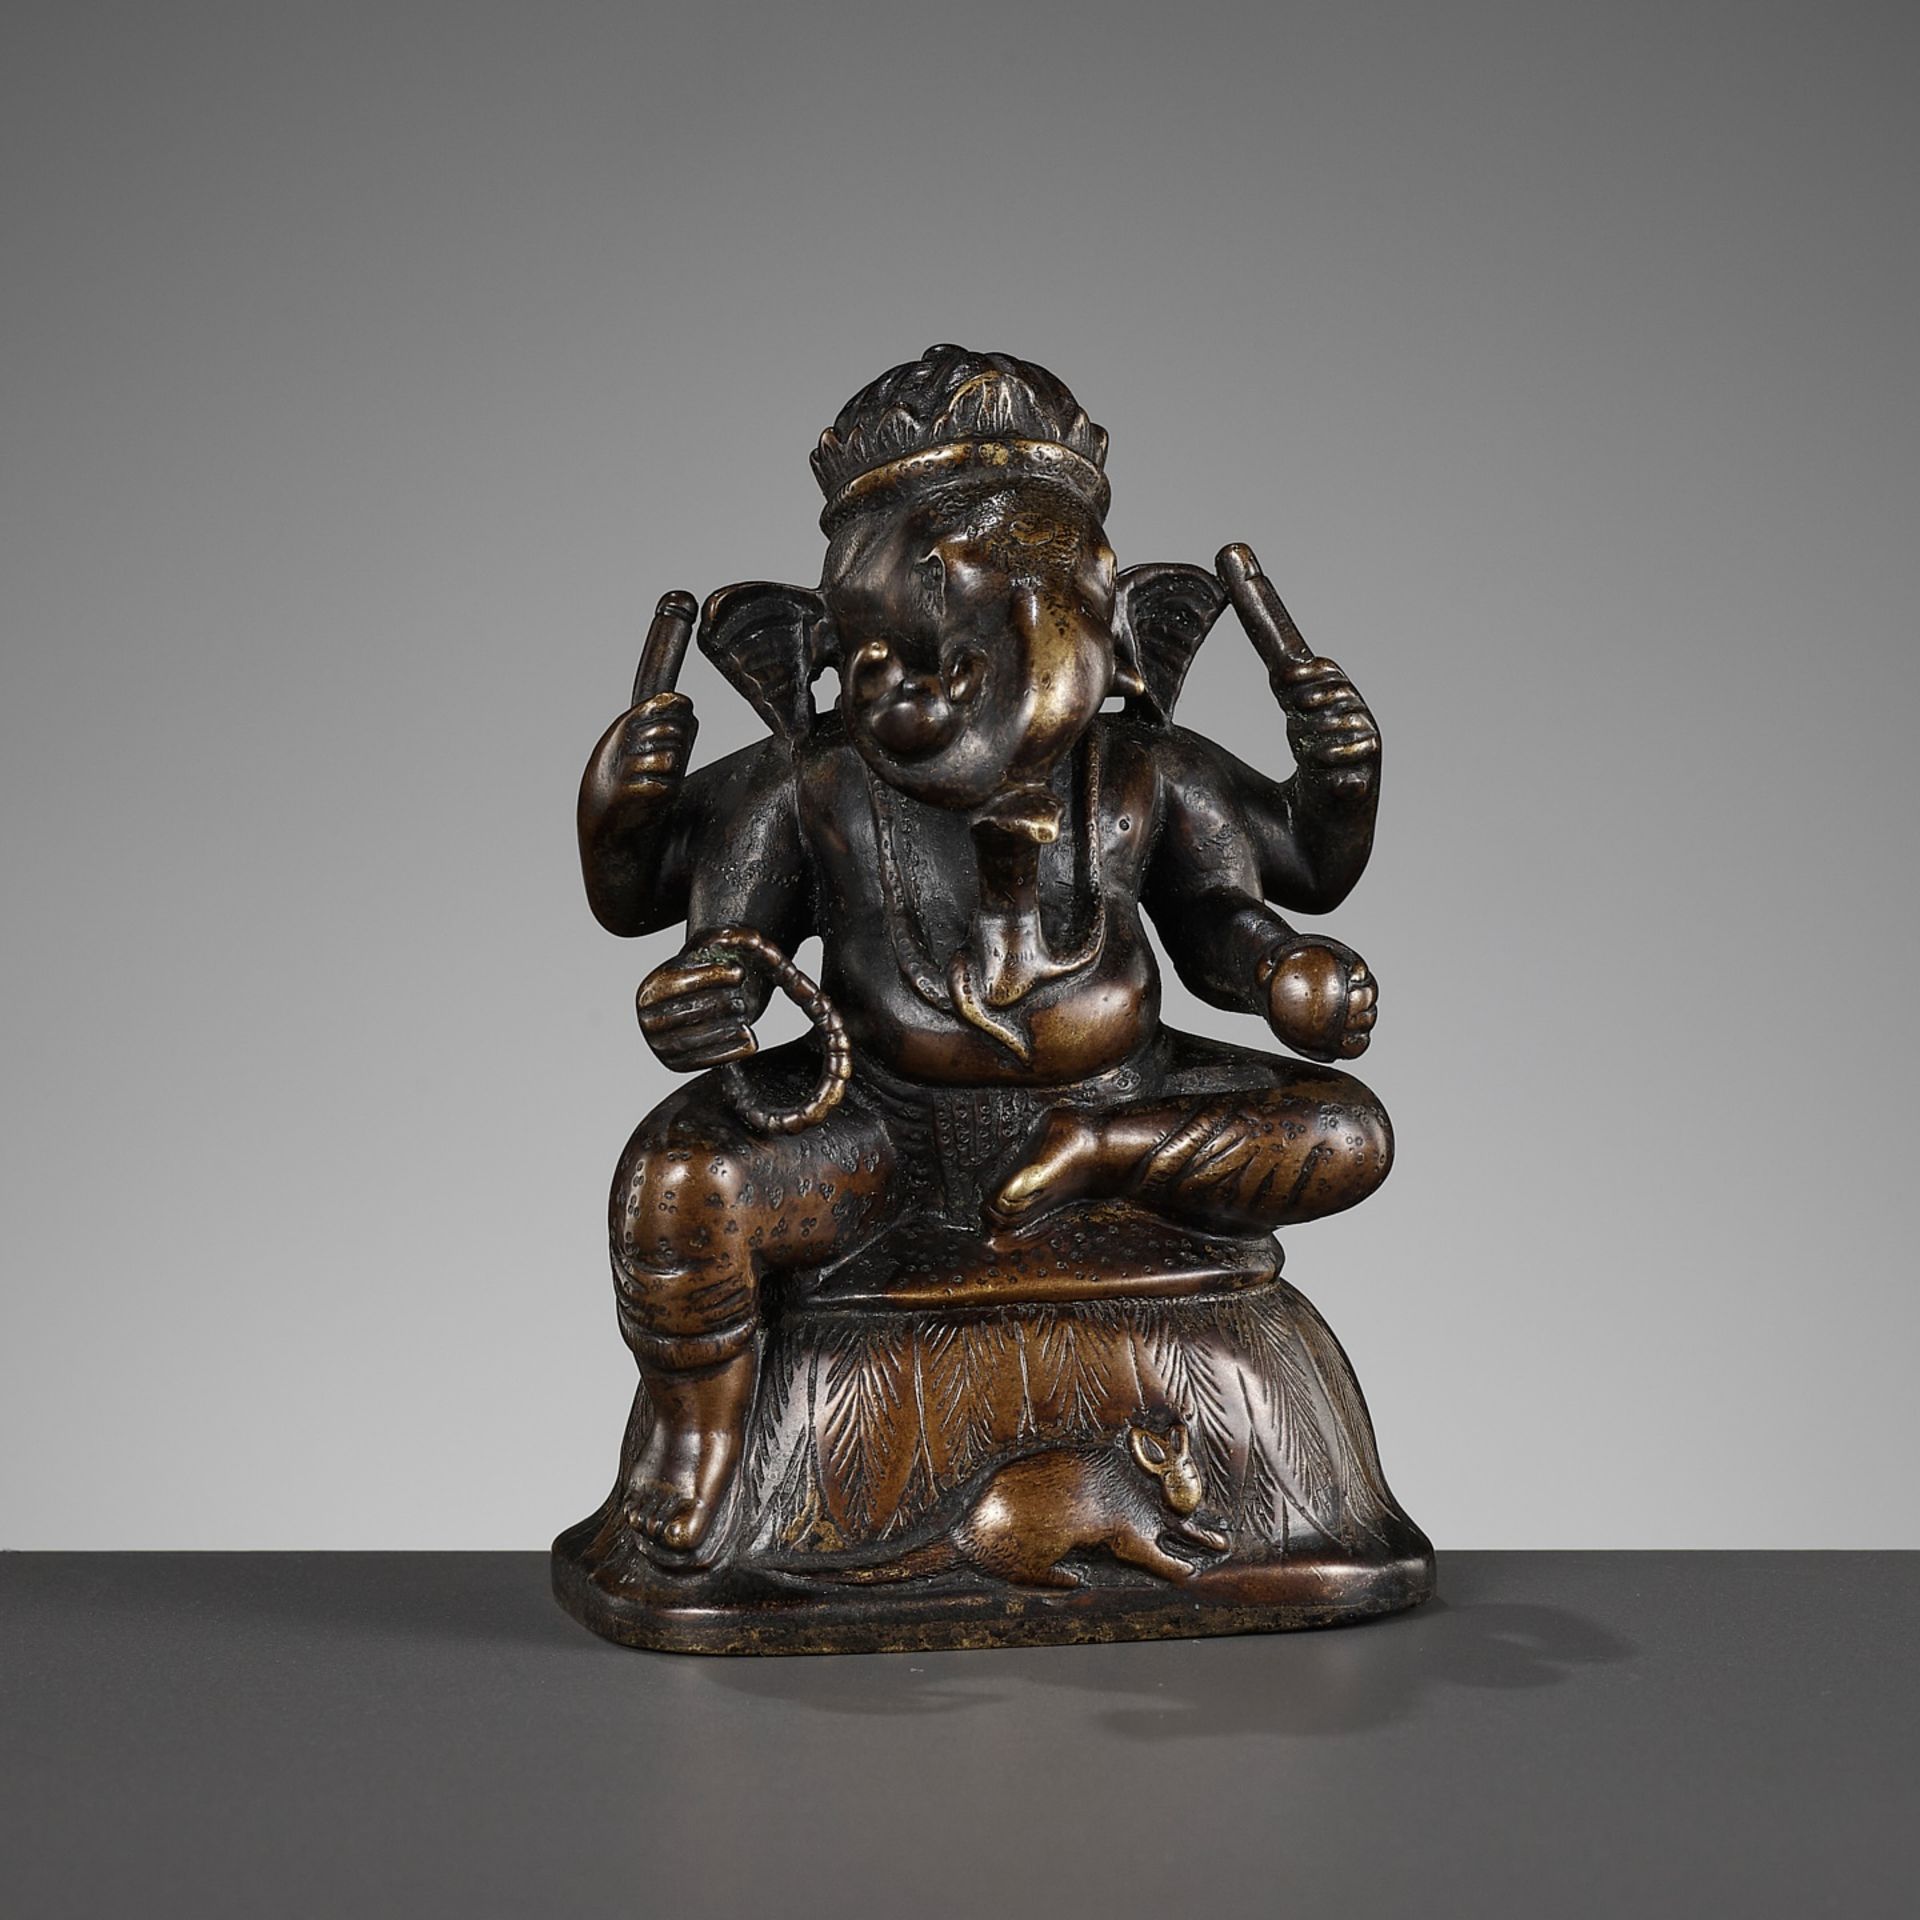 A SMALL BRONZE FIGURE OF GANESHA, SOUTH INDIA, 17TH - 18TH CENTURY